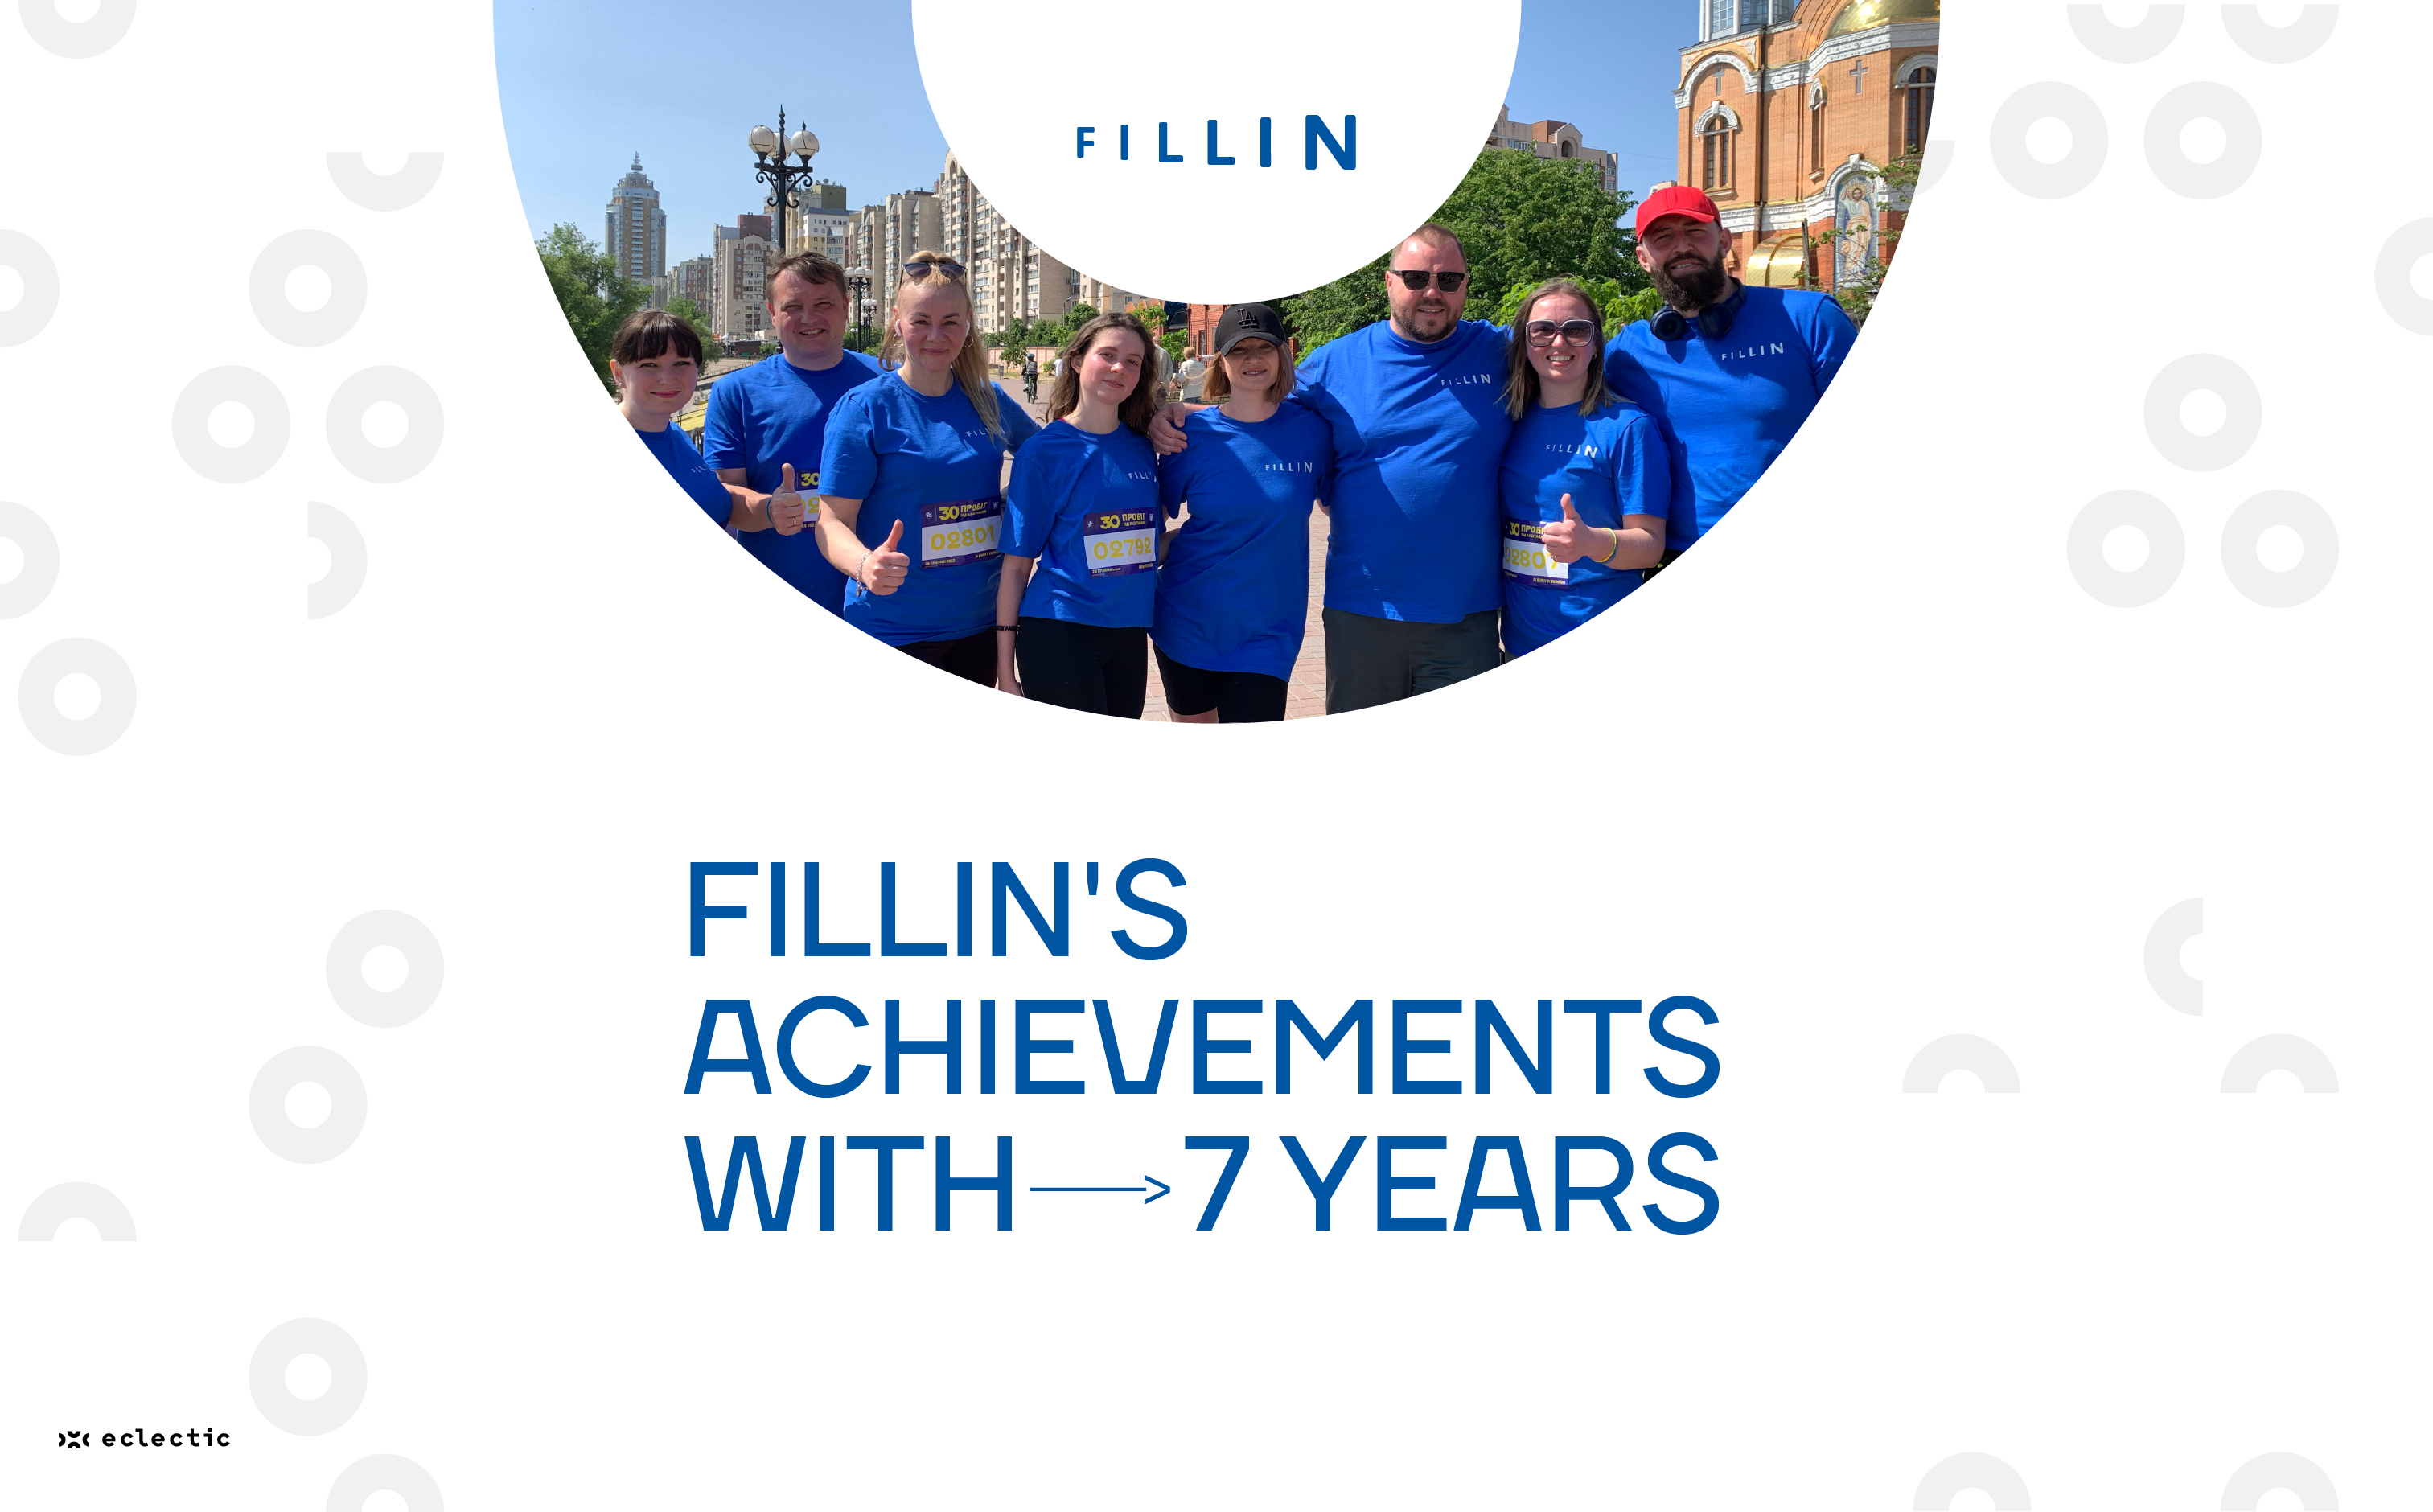 <strong>FILLIN: 7 YEARS OF ACHIEVEMENTS</strong>